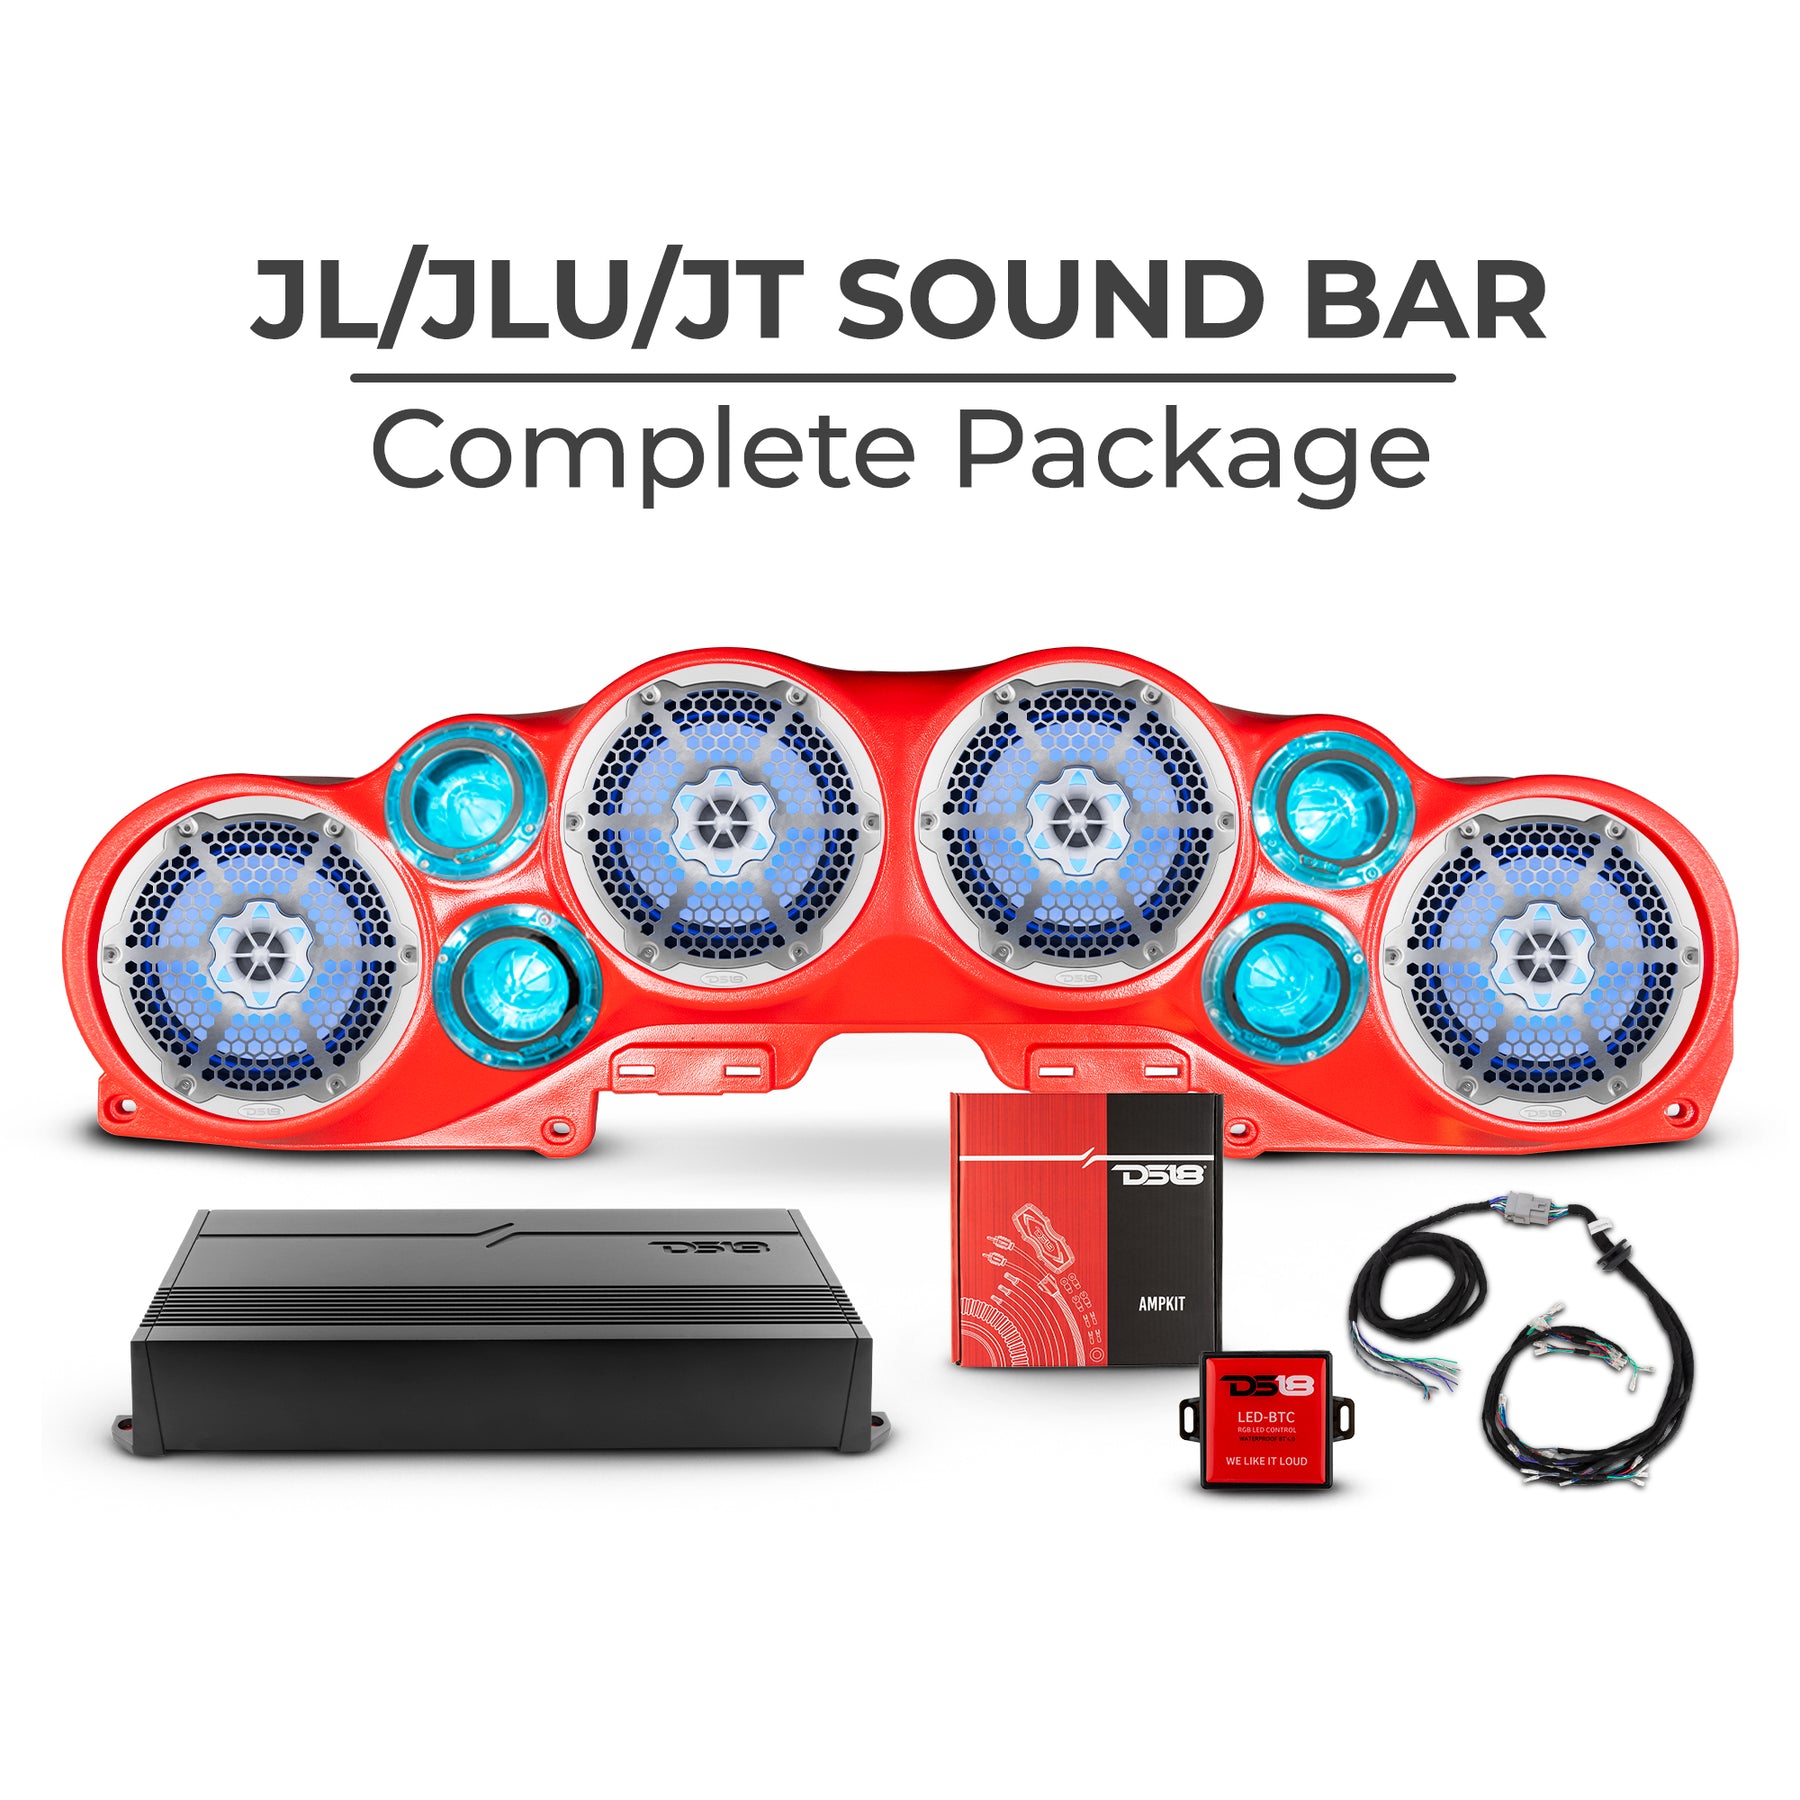 DS18 Jeep JL/JLU/JT (Gladiator) Complete Sound Bar Package with Metal Grill Marine Speakers